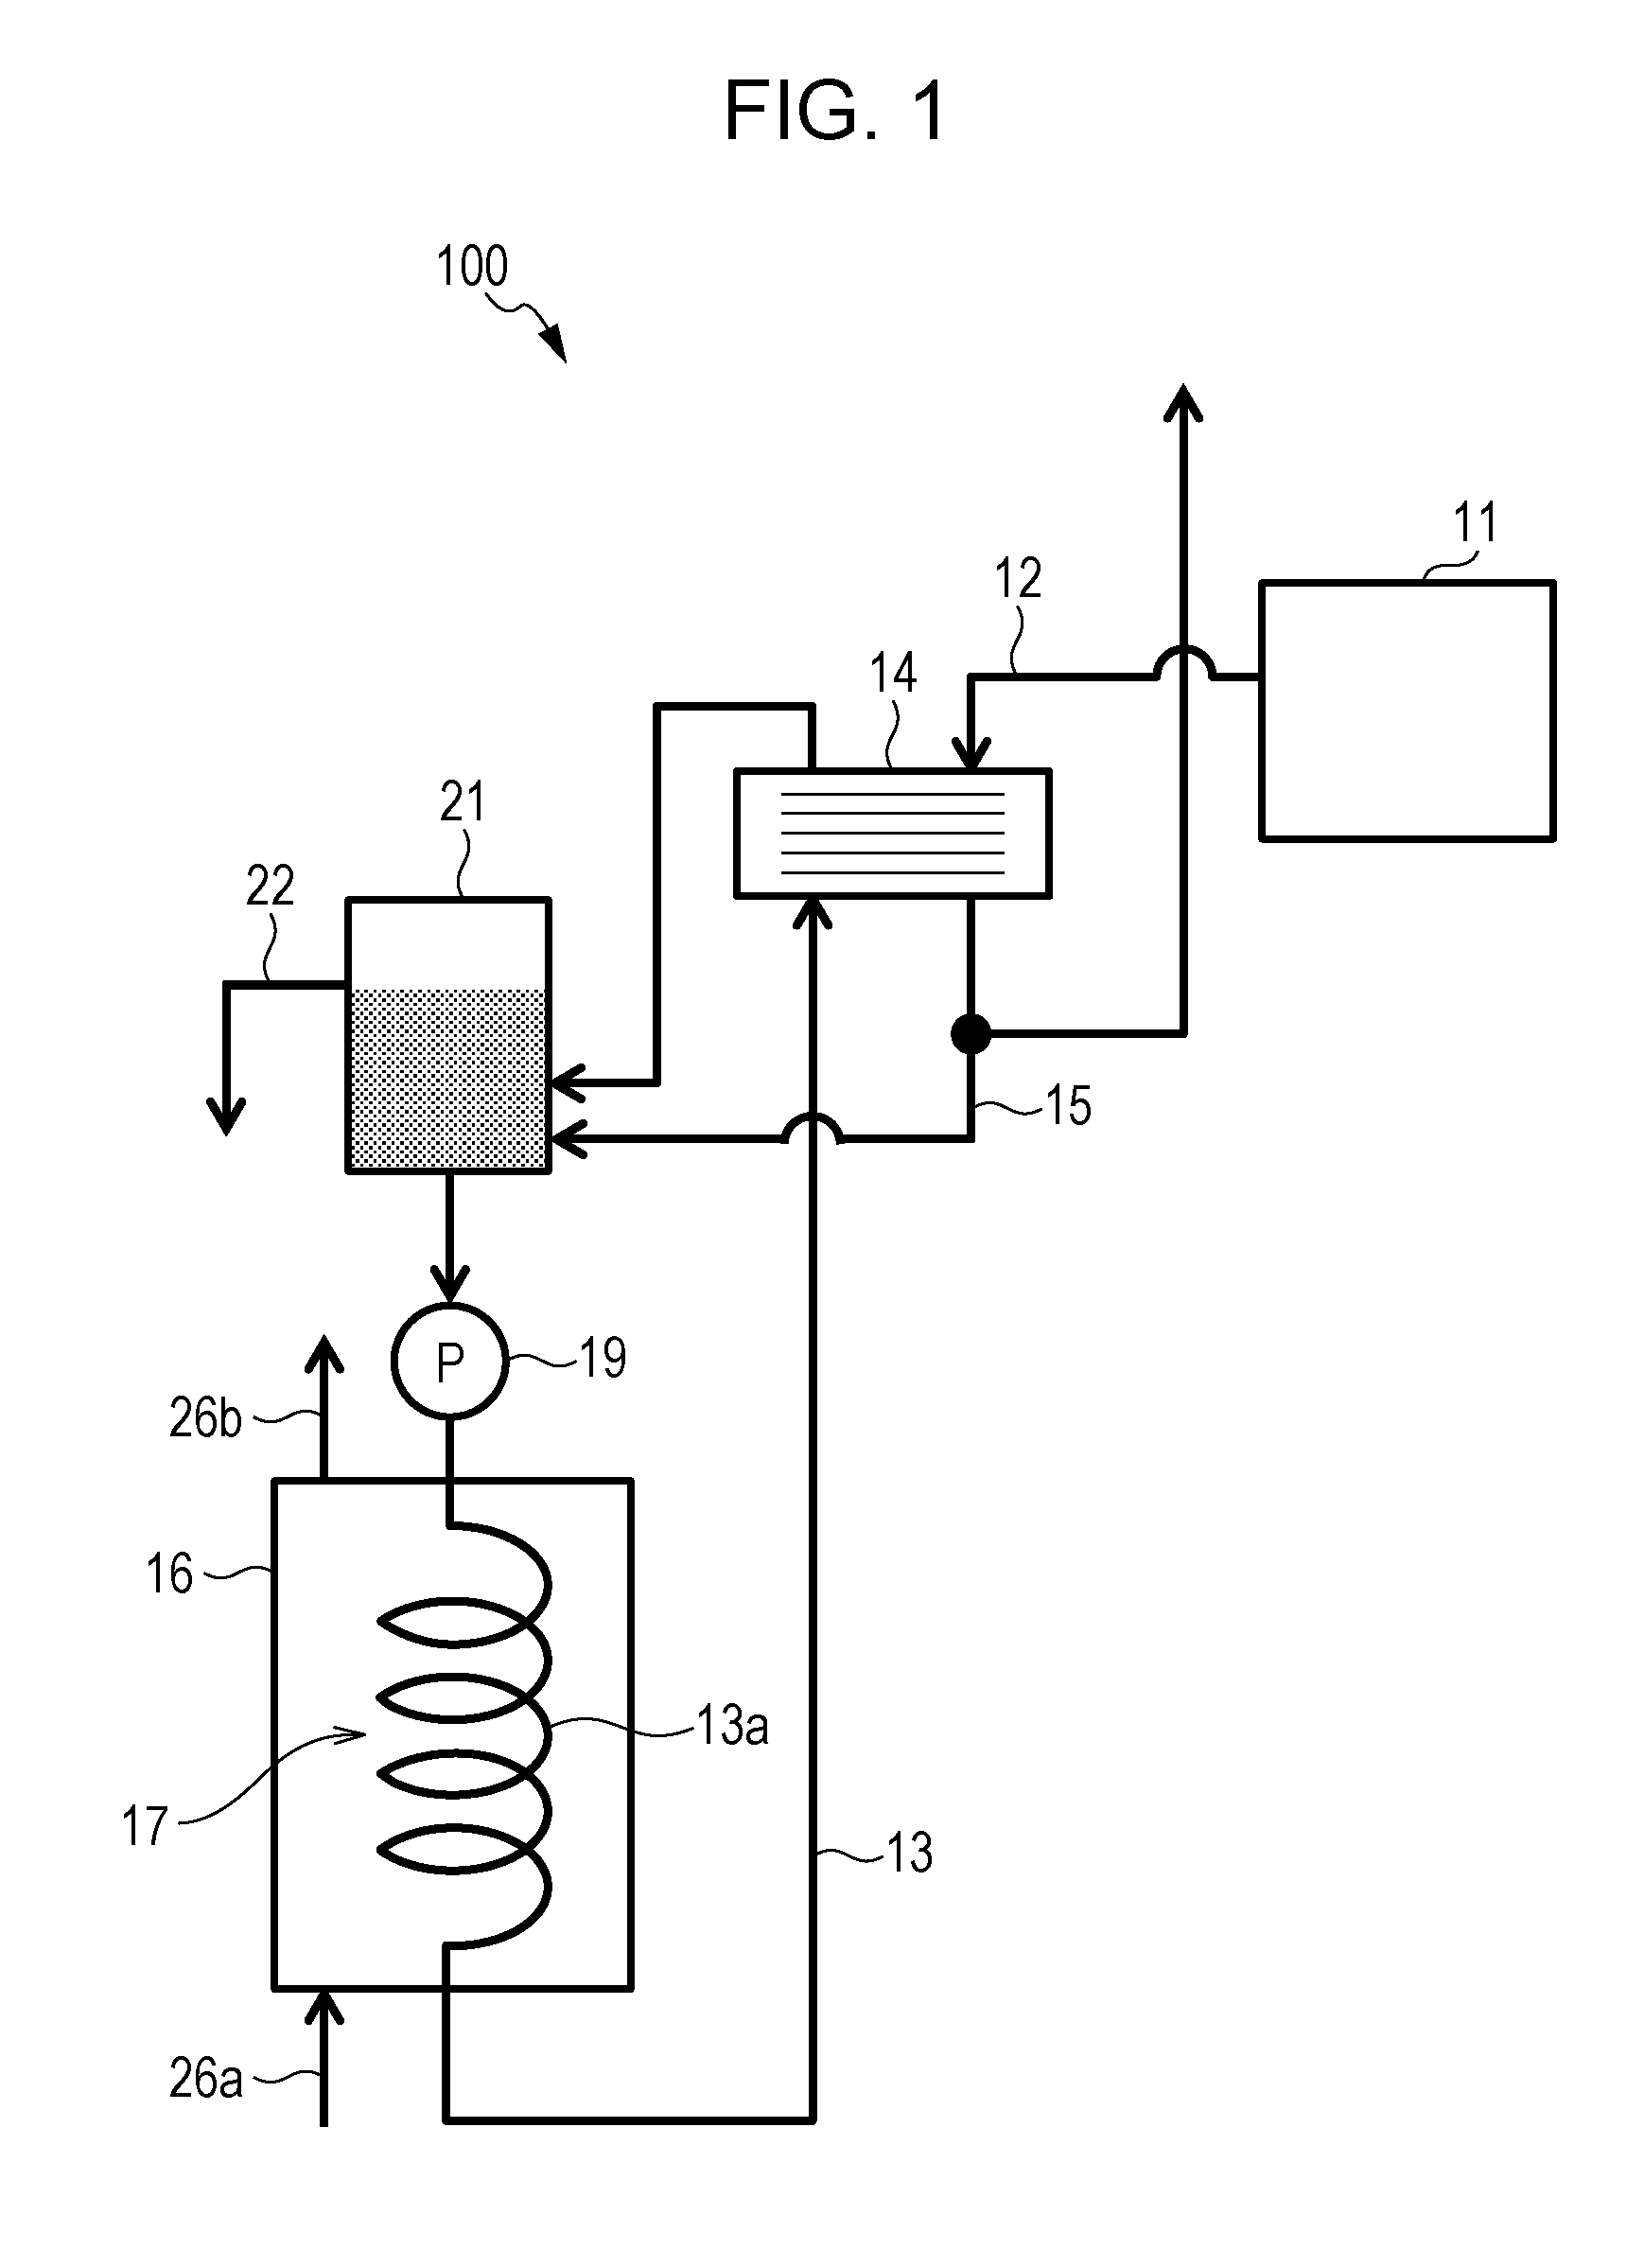 Solid oxide fuel cell system